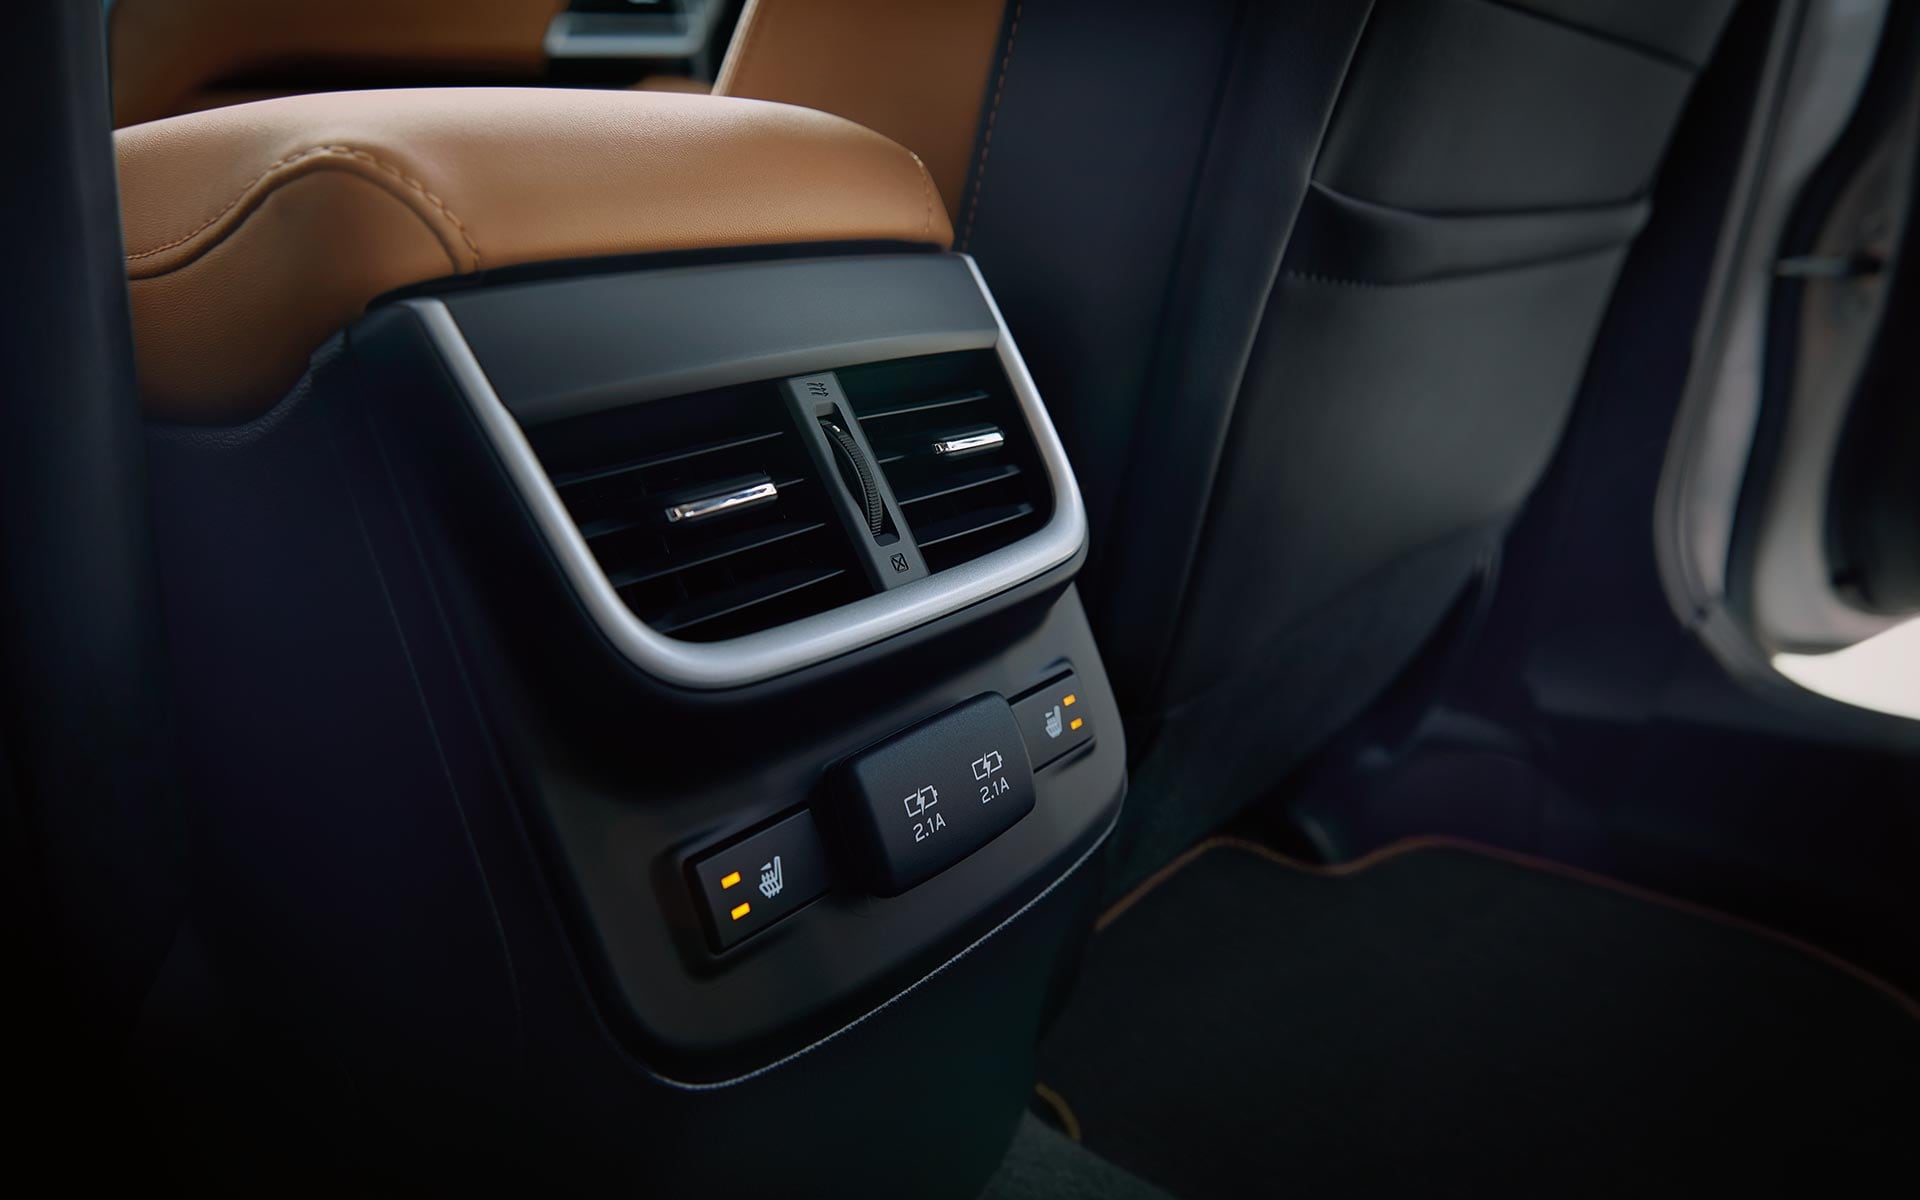  A close-up of the heated rear seat controls and climate control vents on the 2022 Subaru Legacy Touring XT.